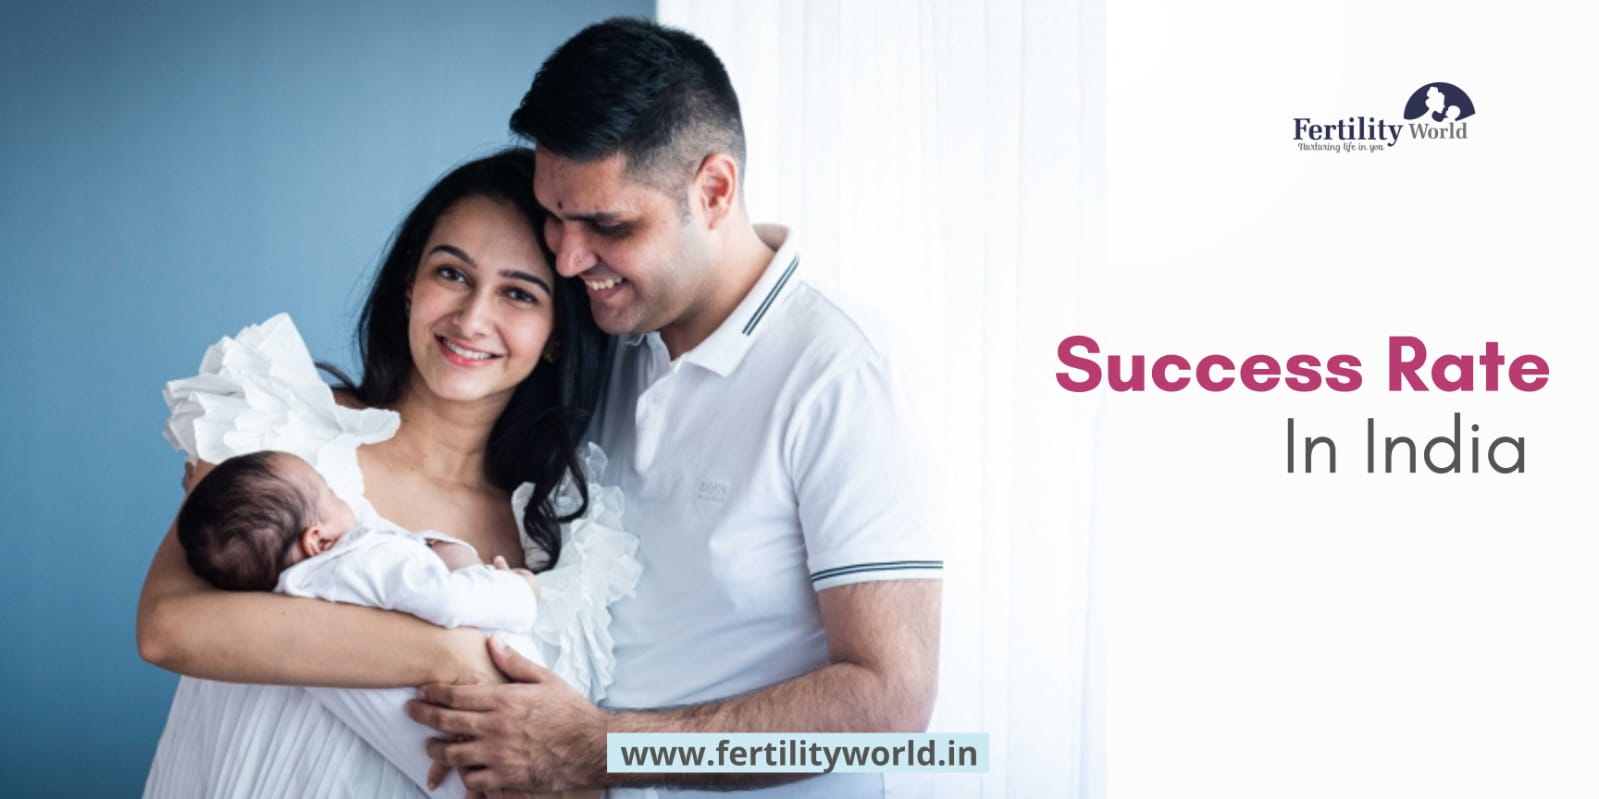 IVF success rate in India